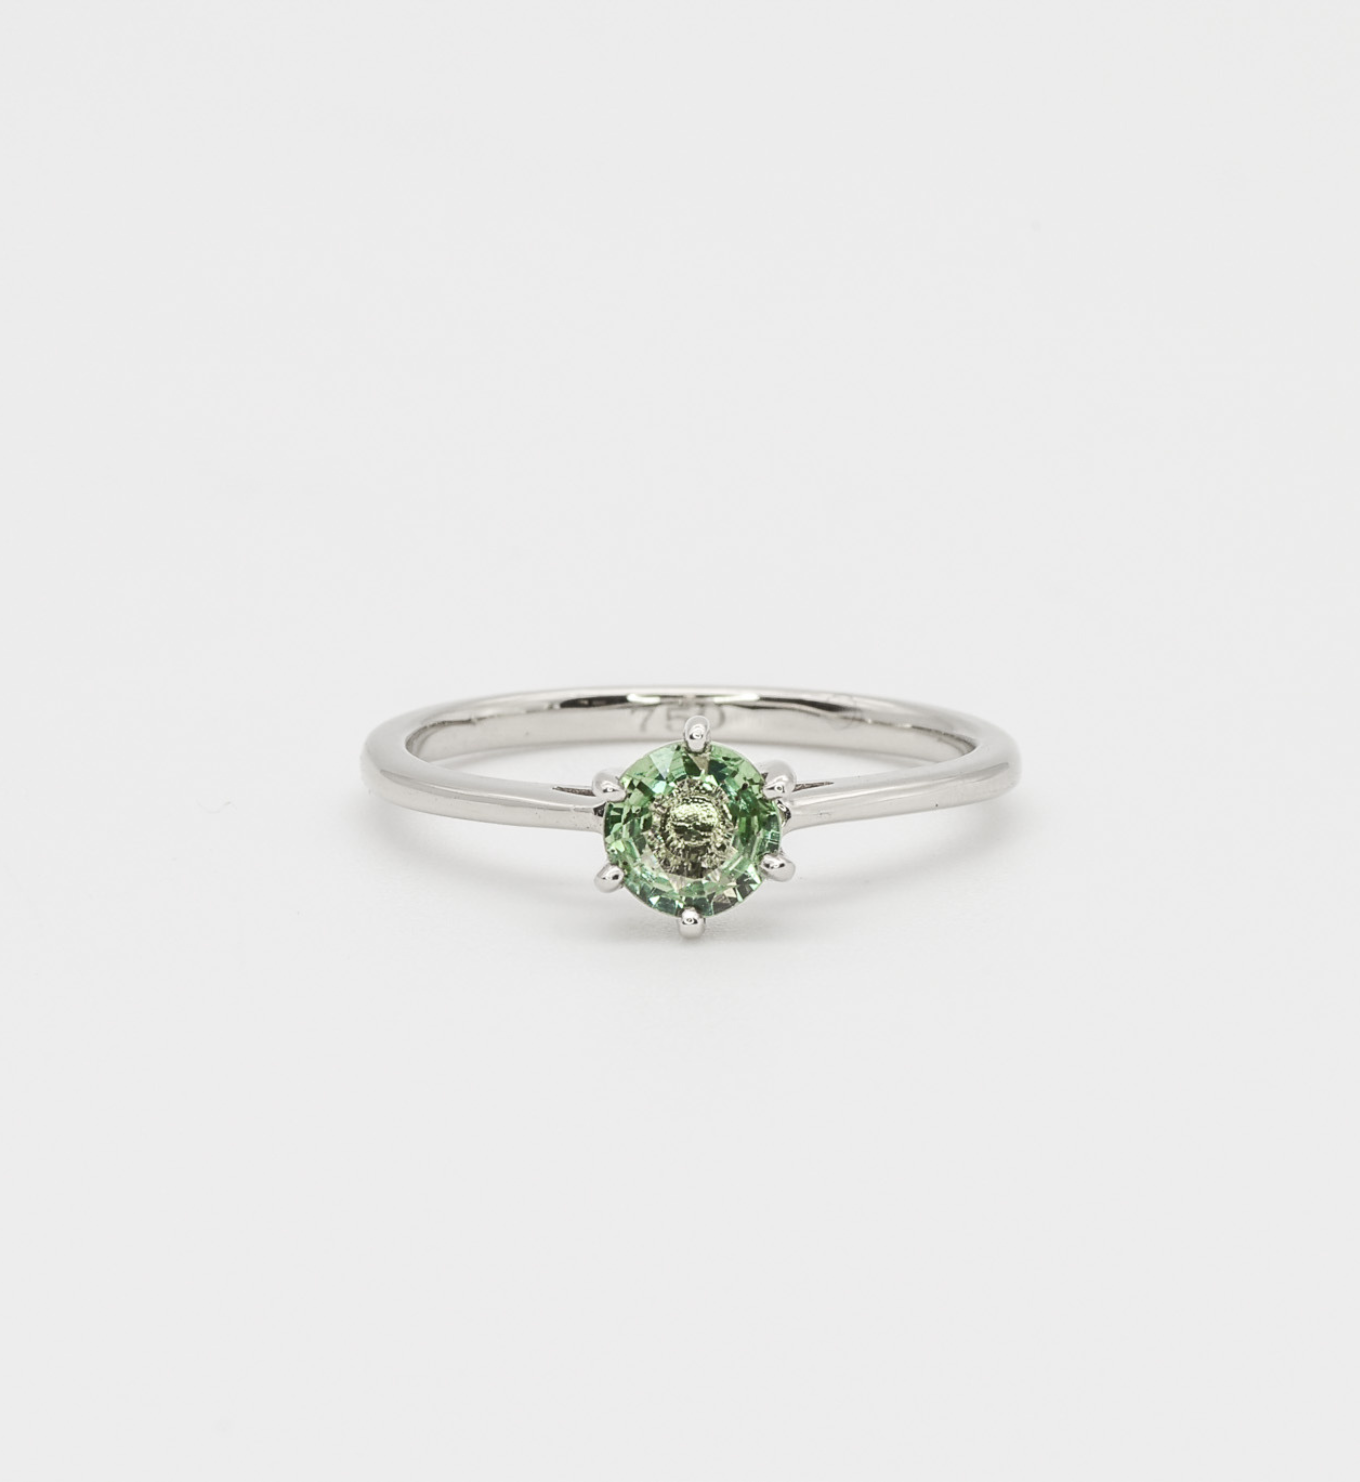 Green Sapphire Ring, Solid 18k White Gold Ring, Classy Round Engagement Ring, 6-Prong Ring